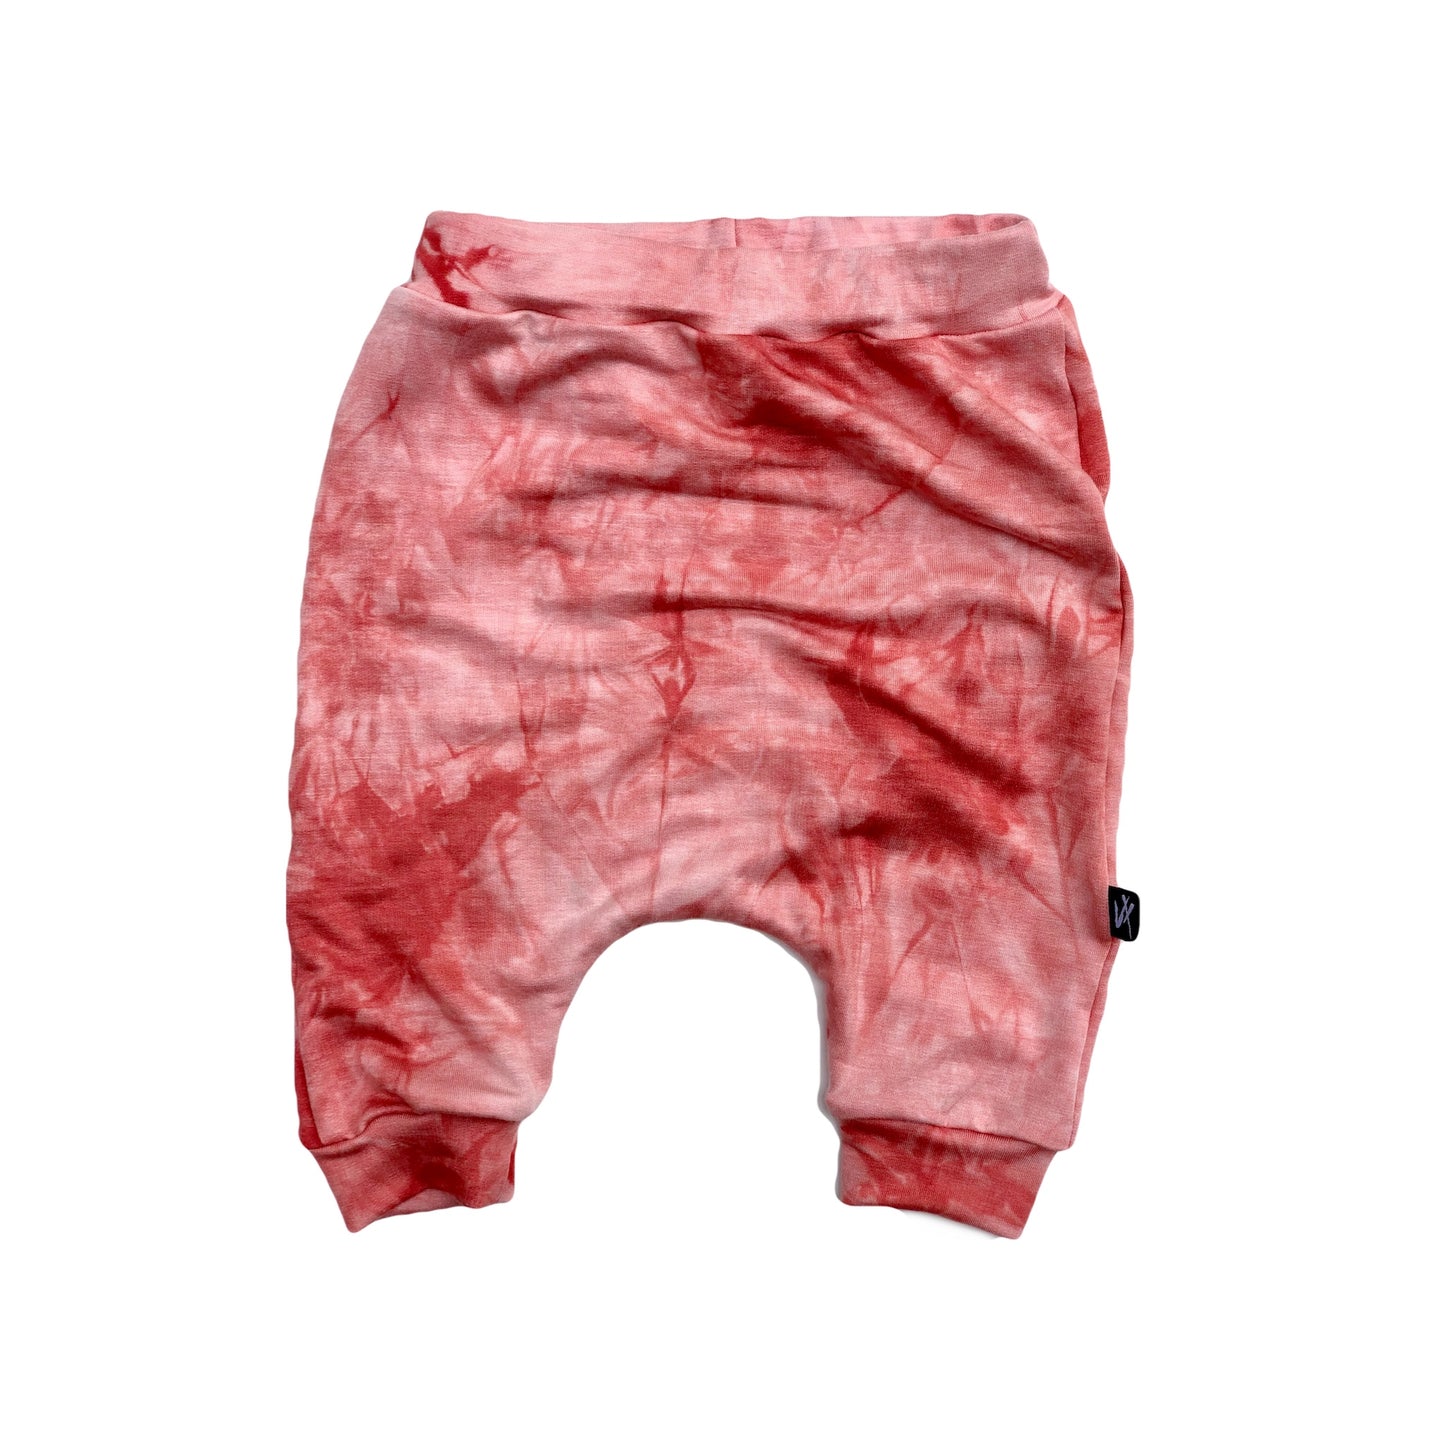 RTS Muted Coral Tie Dye Shorts